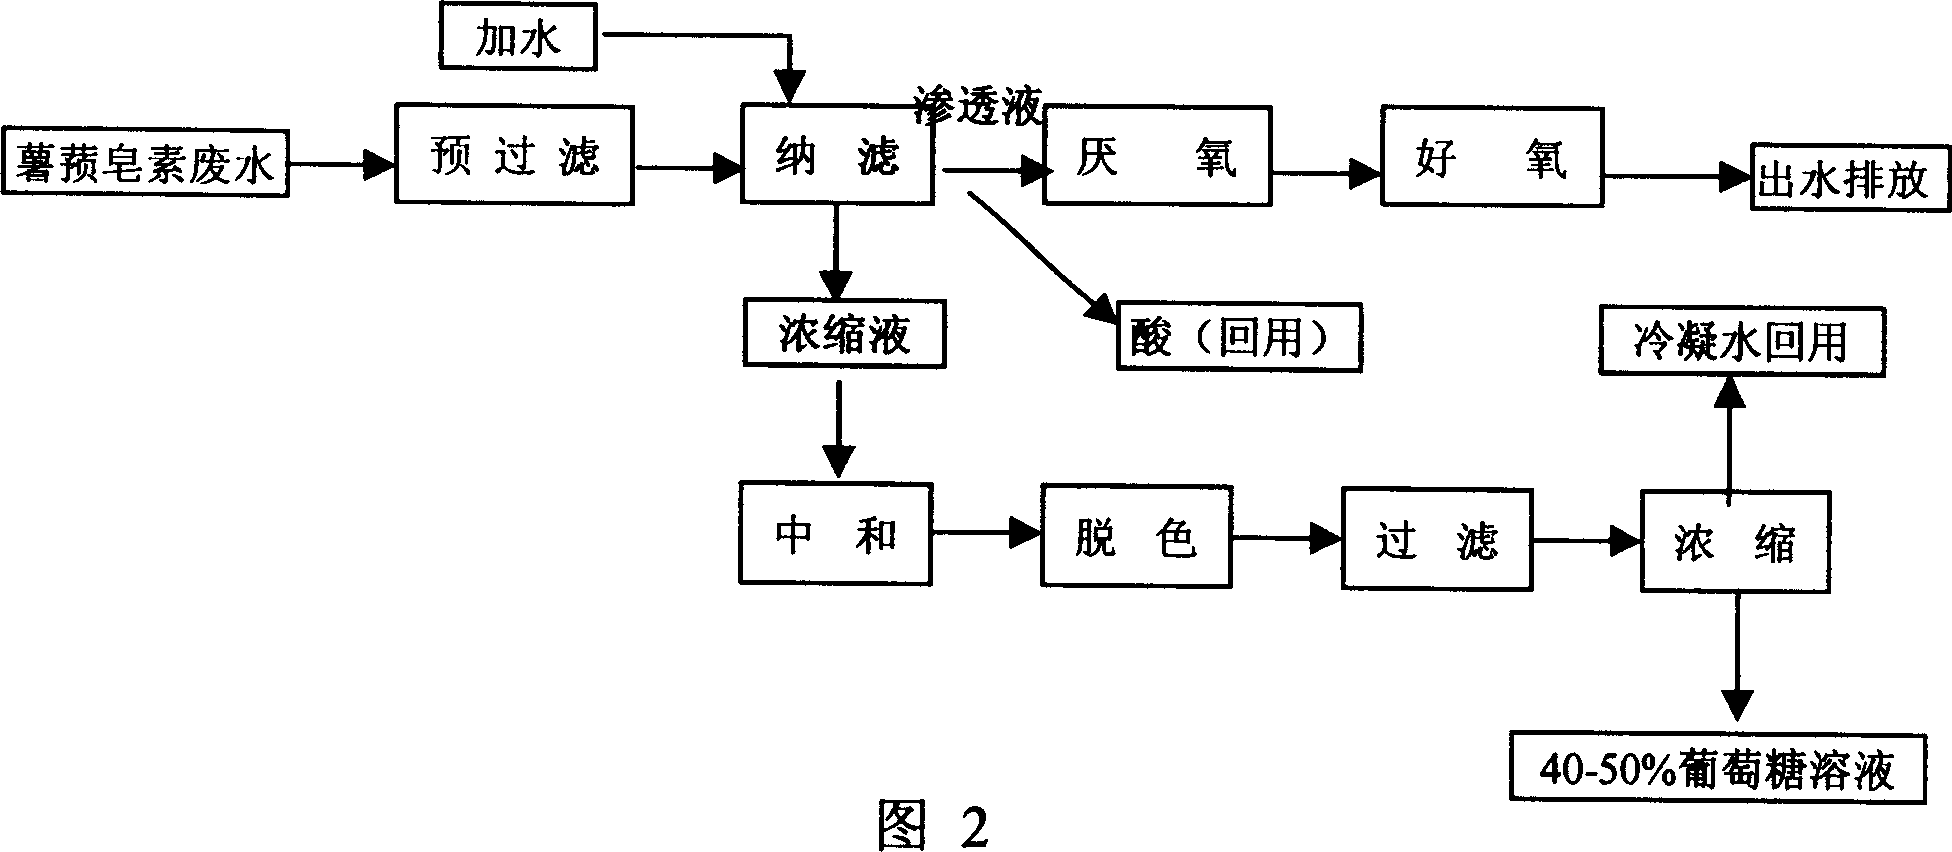 Method for treating waste water of chinese yam saporin and recovering gluocose and hydrochloric acid by membrane integrating technique